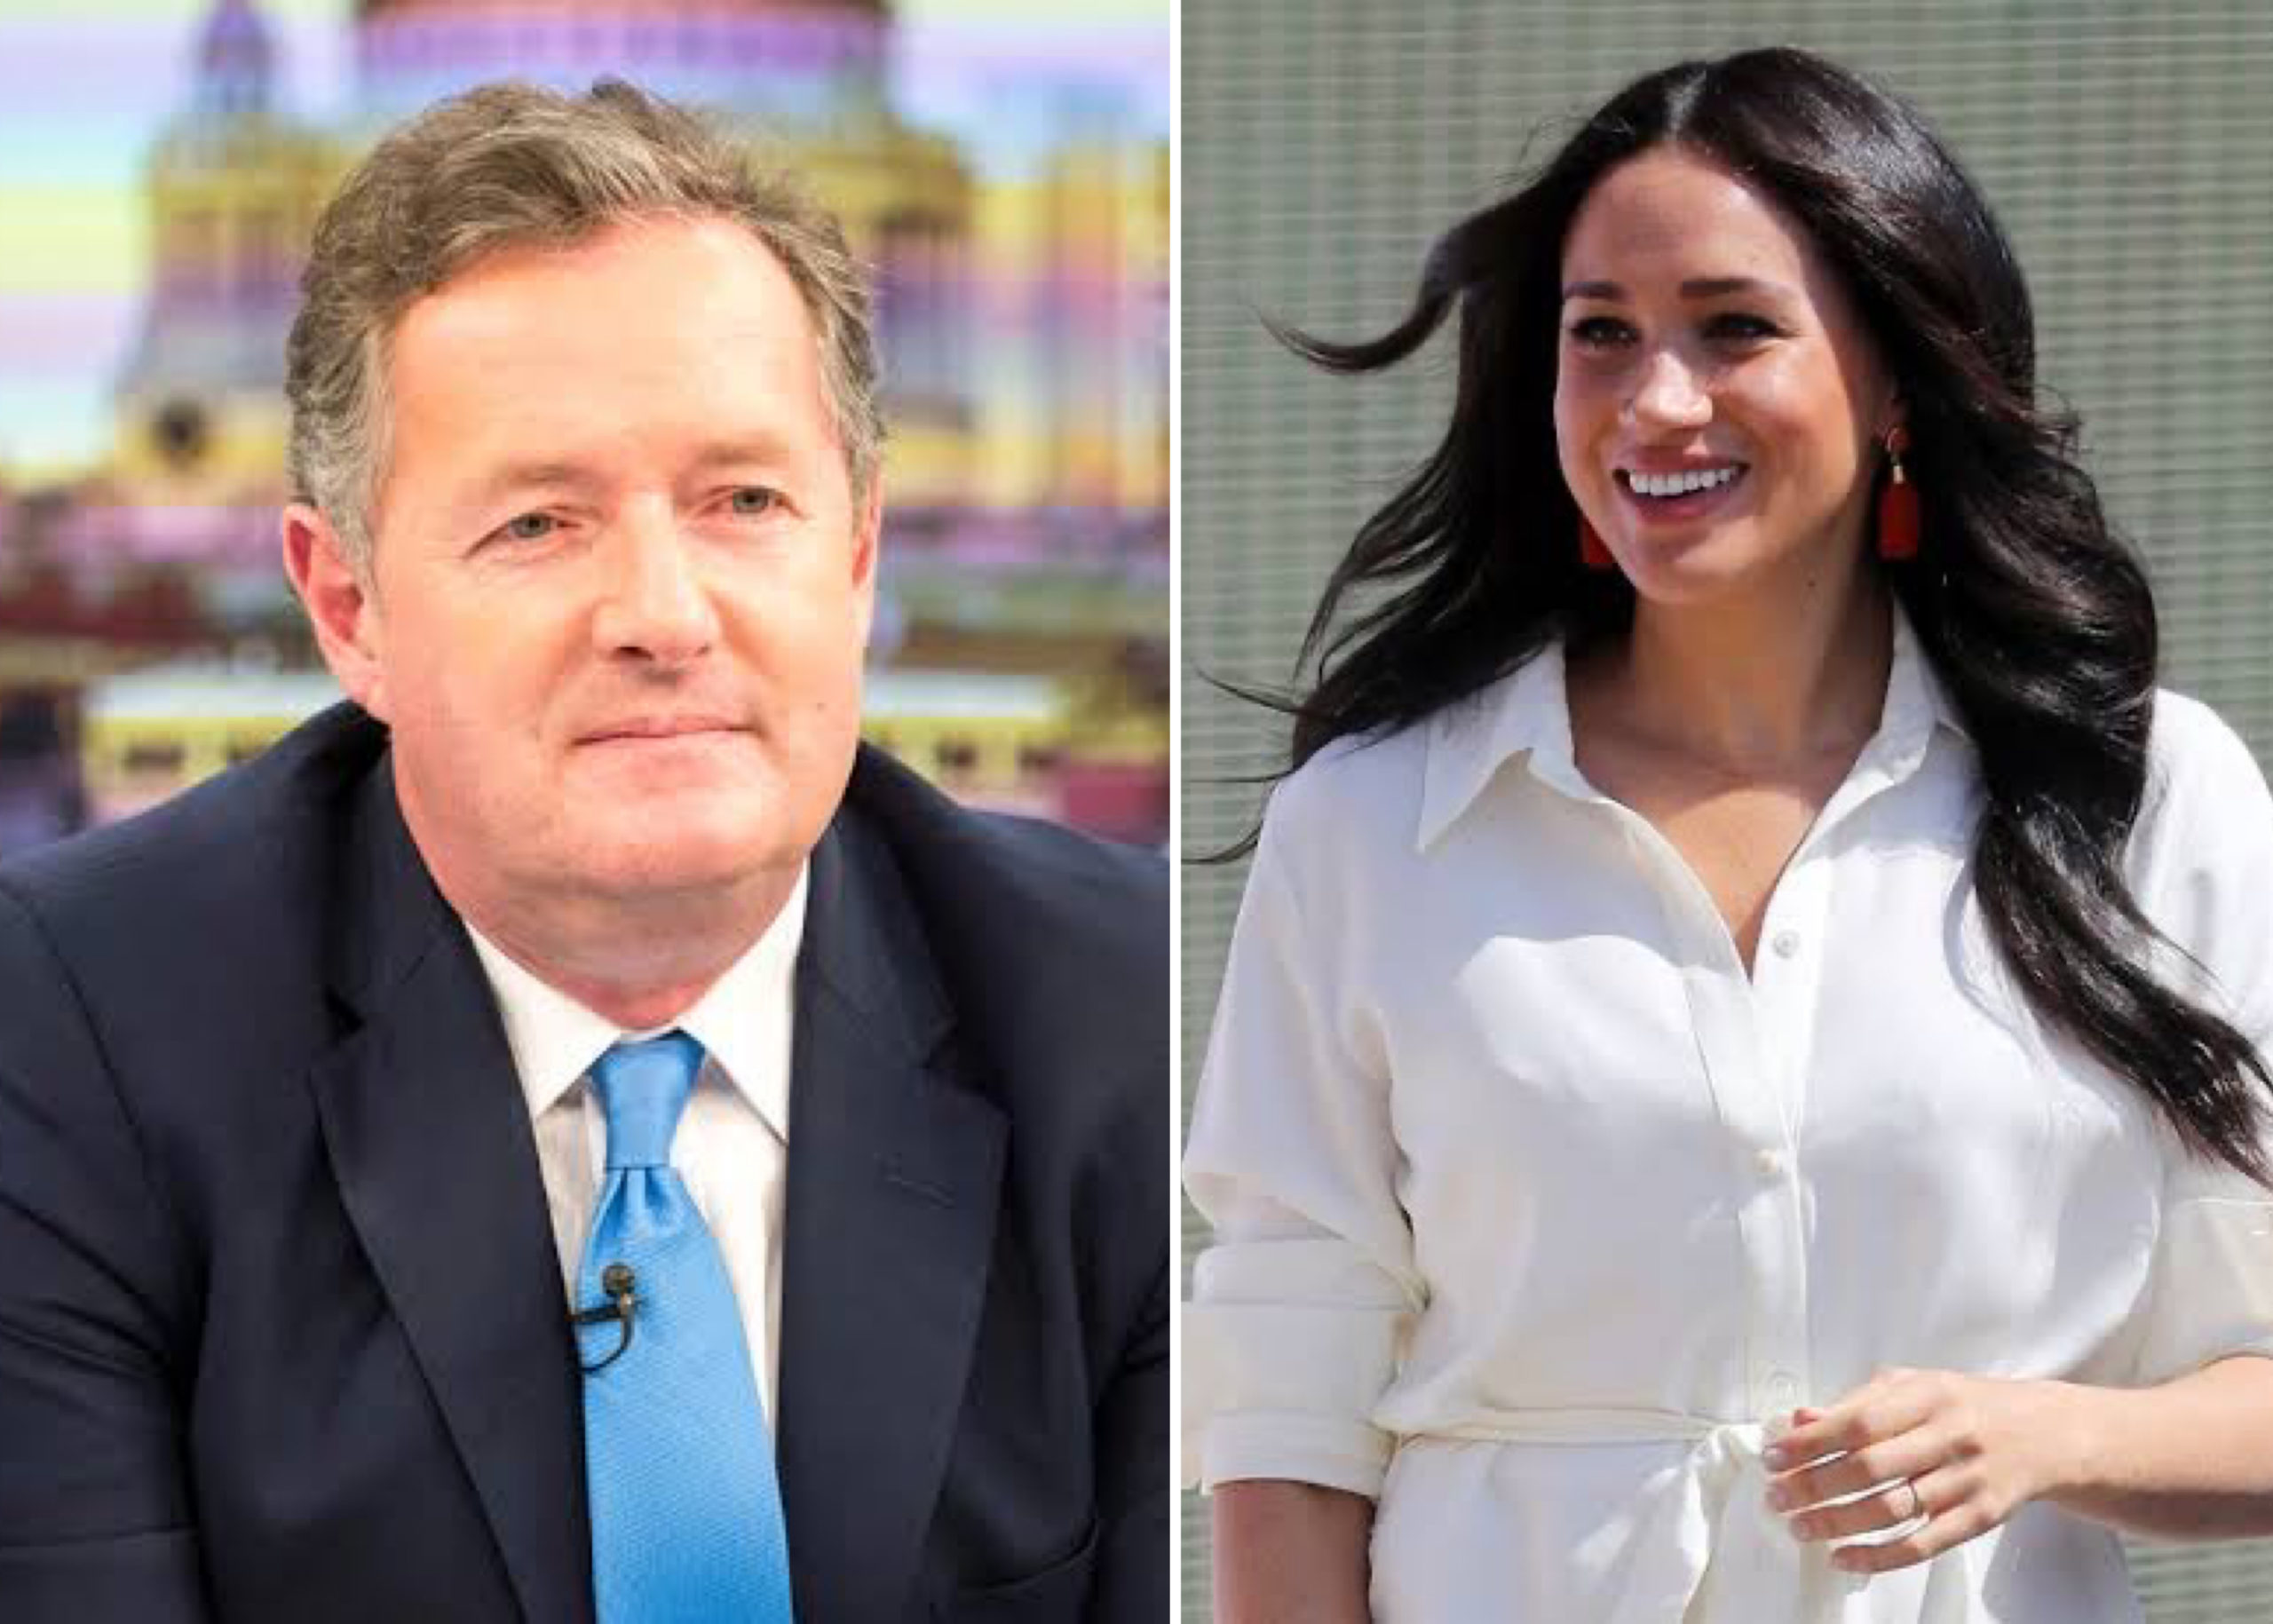 British Broadcaster, Piers Morgan Quits ‘Good Morning Britain’ Show Amid Backlash Over Comments About Meghan Markle